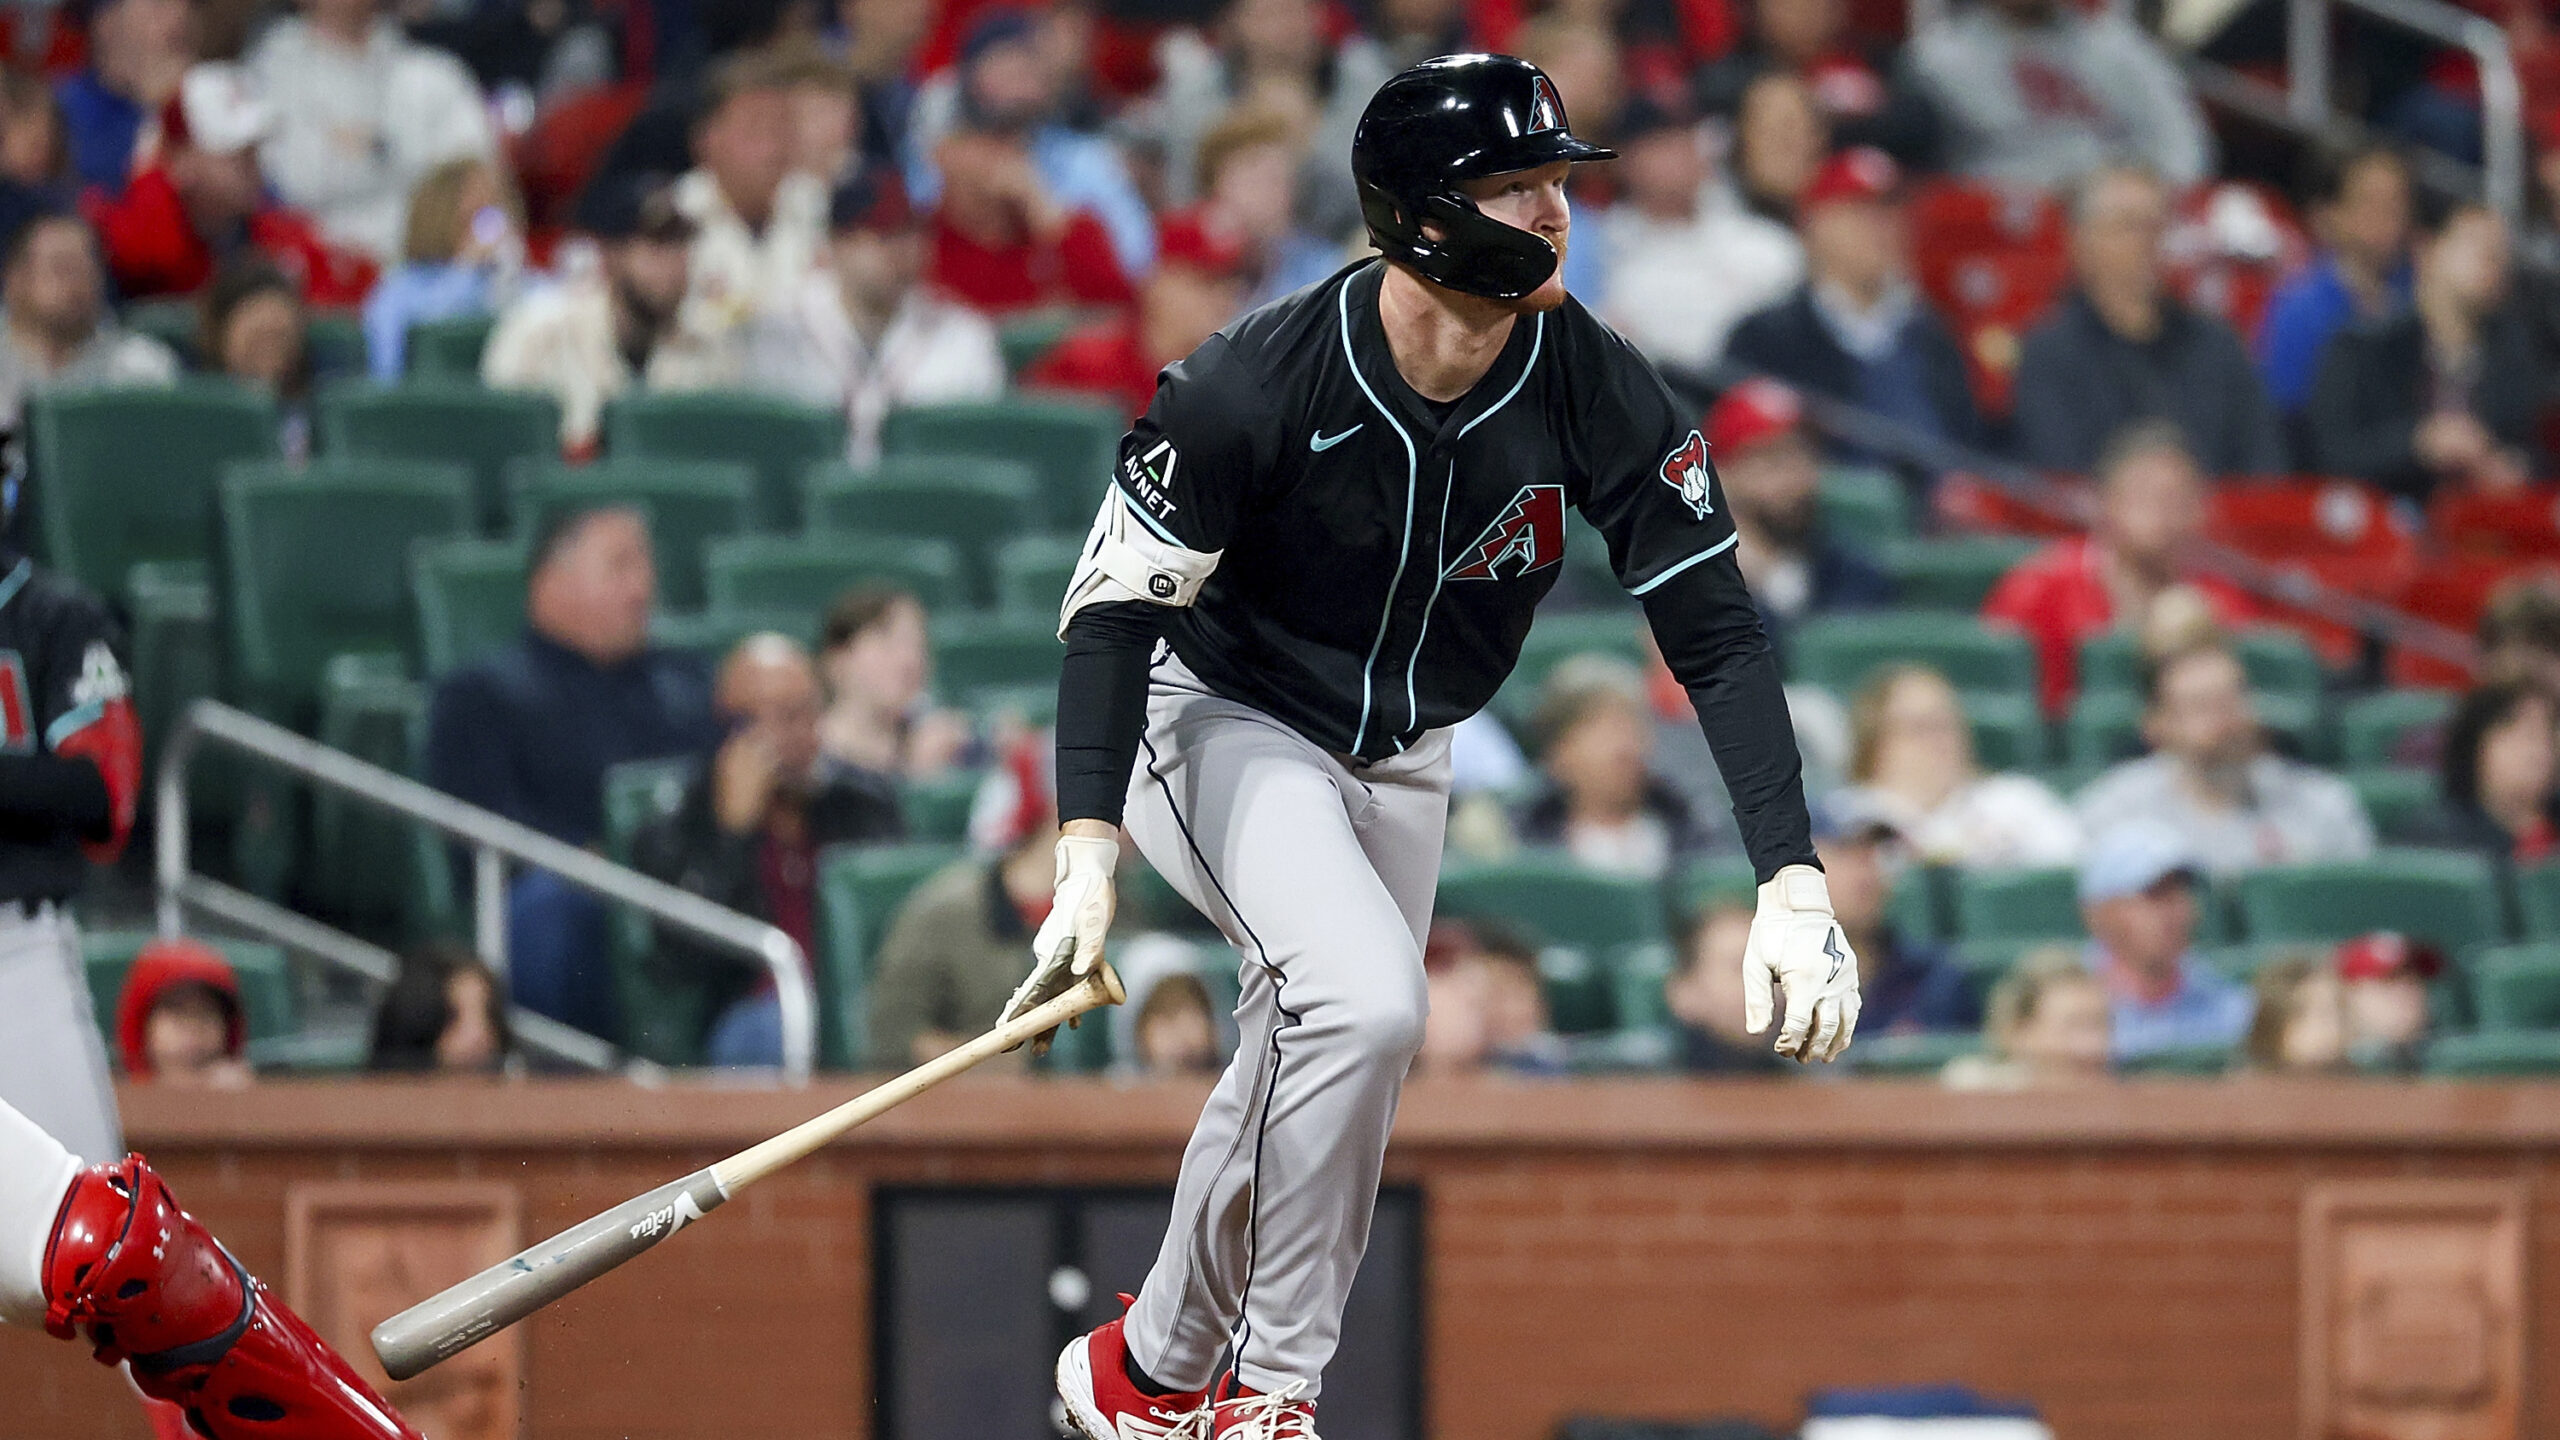 Pavin Smith drives in six runs as the D-backs beat the Cardinals 14-1....